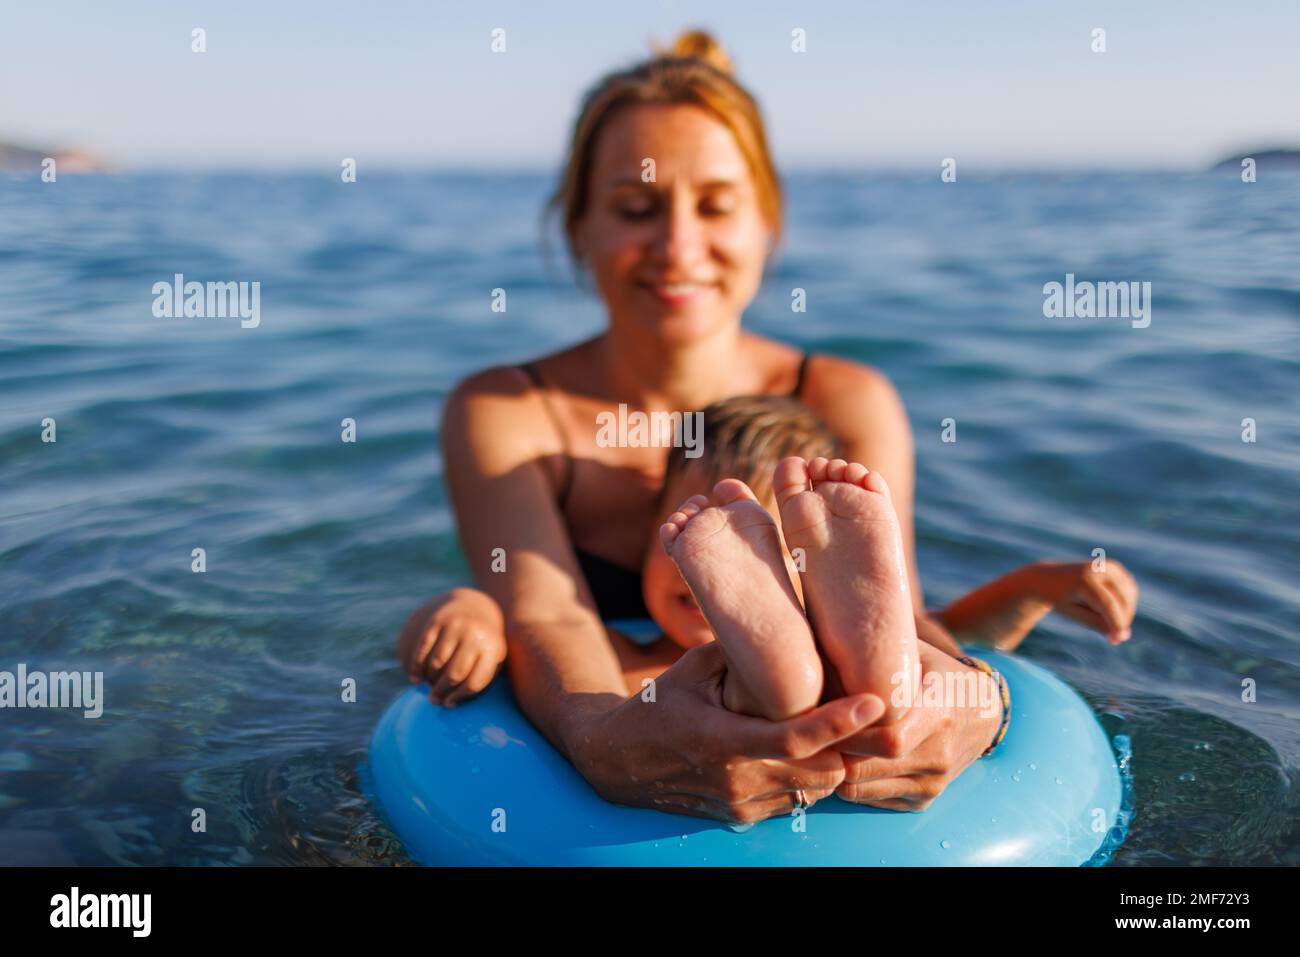 A cute young mother with blond hair smiles and shows to the camera the small tender legs and arms of her baby son, who is sitting in a bright blue inf Stock Photo